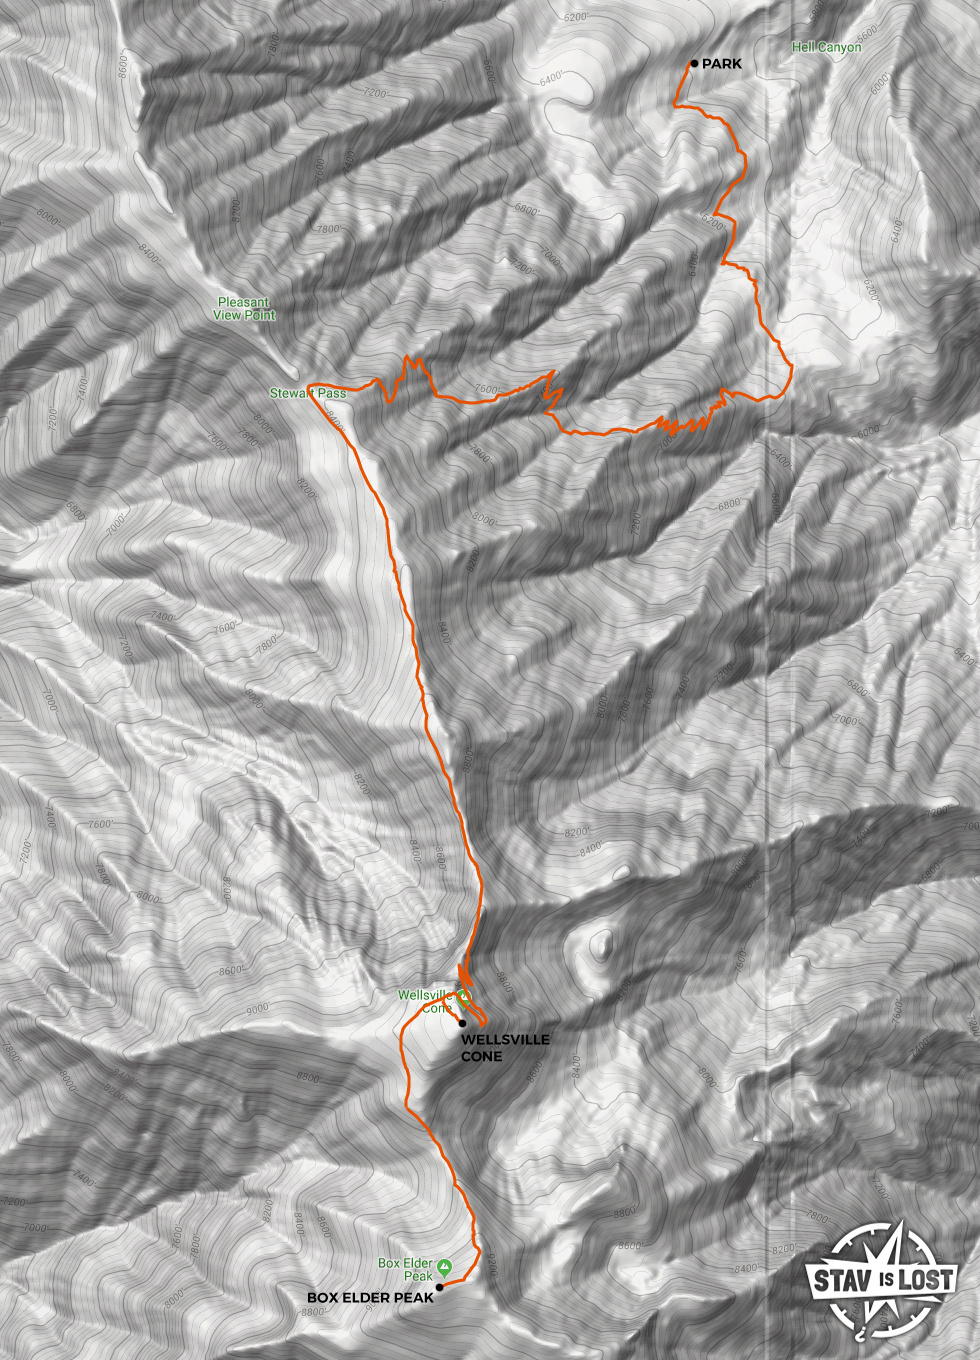 map for Wellsville Cone and Box Elder Peak via Maple Bench by stav is lost